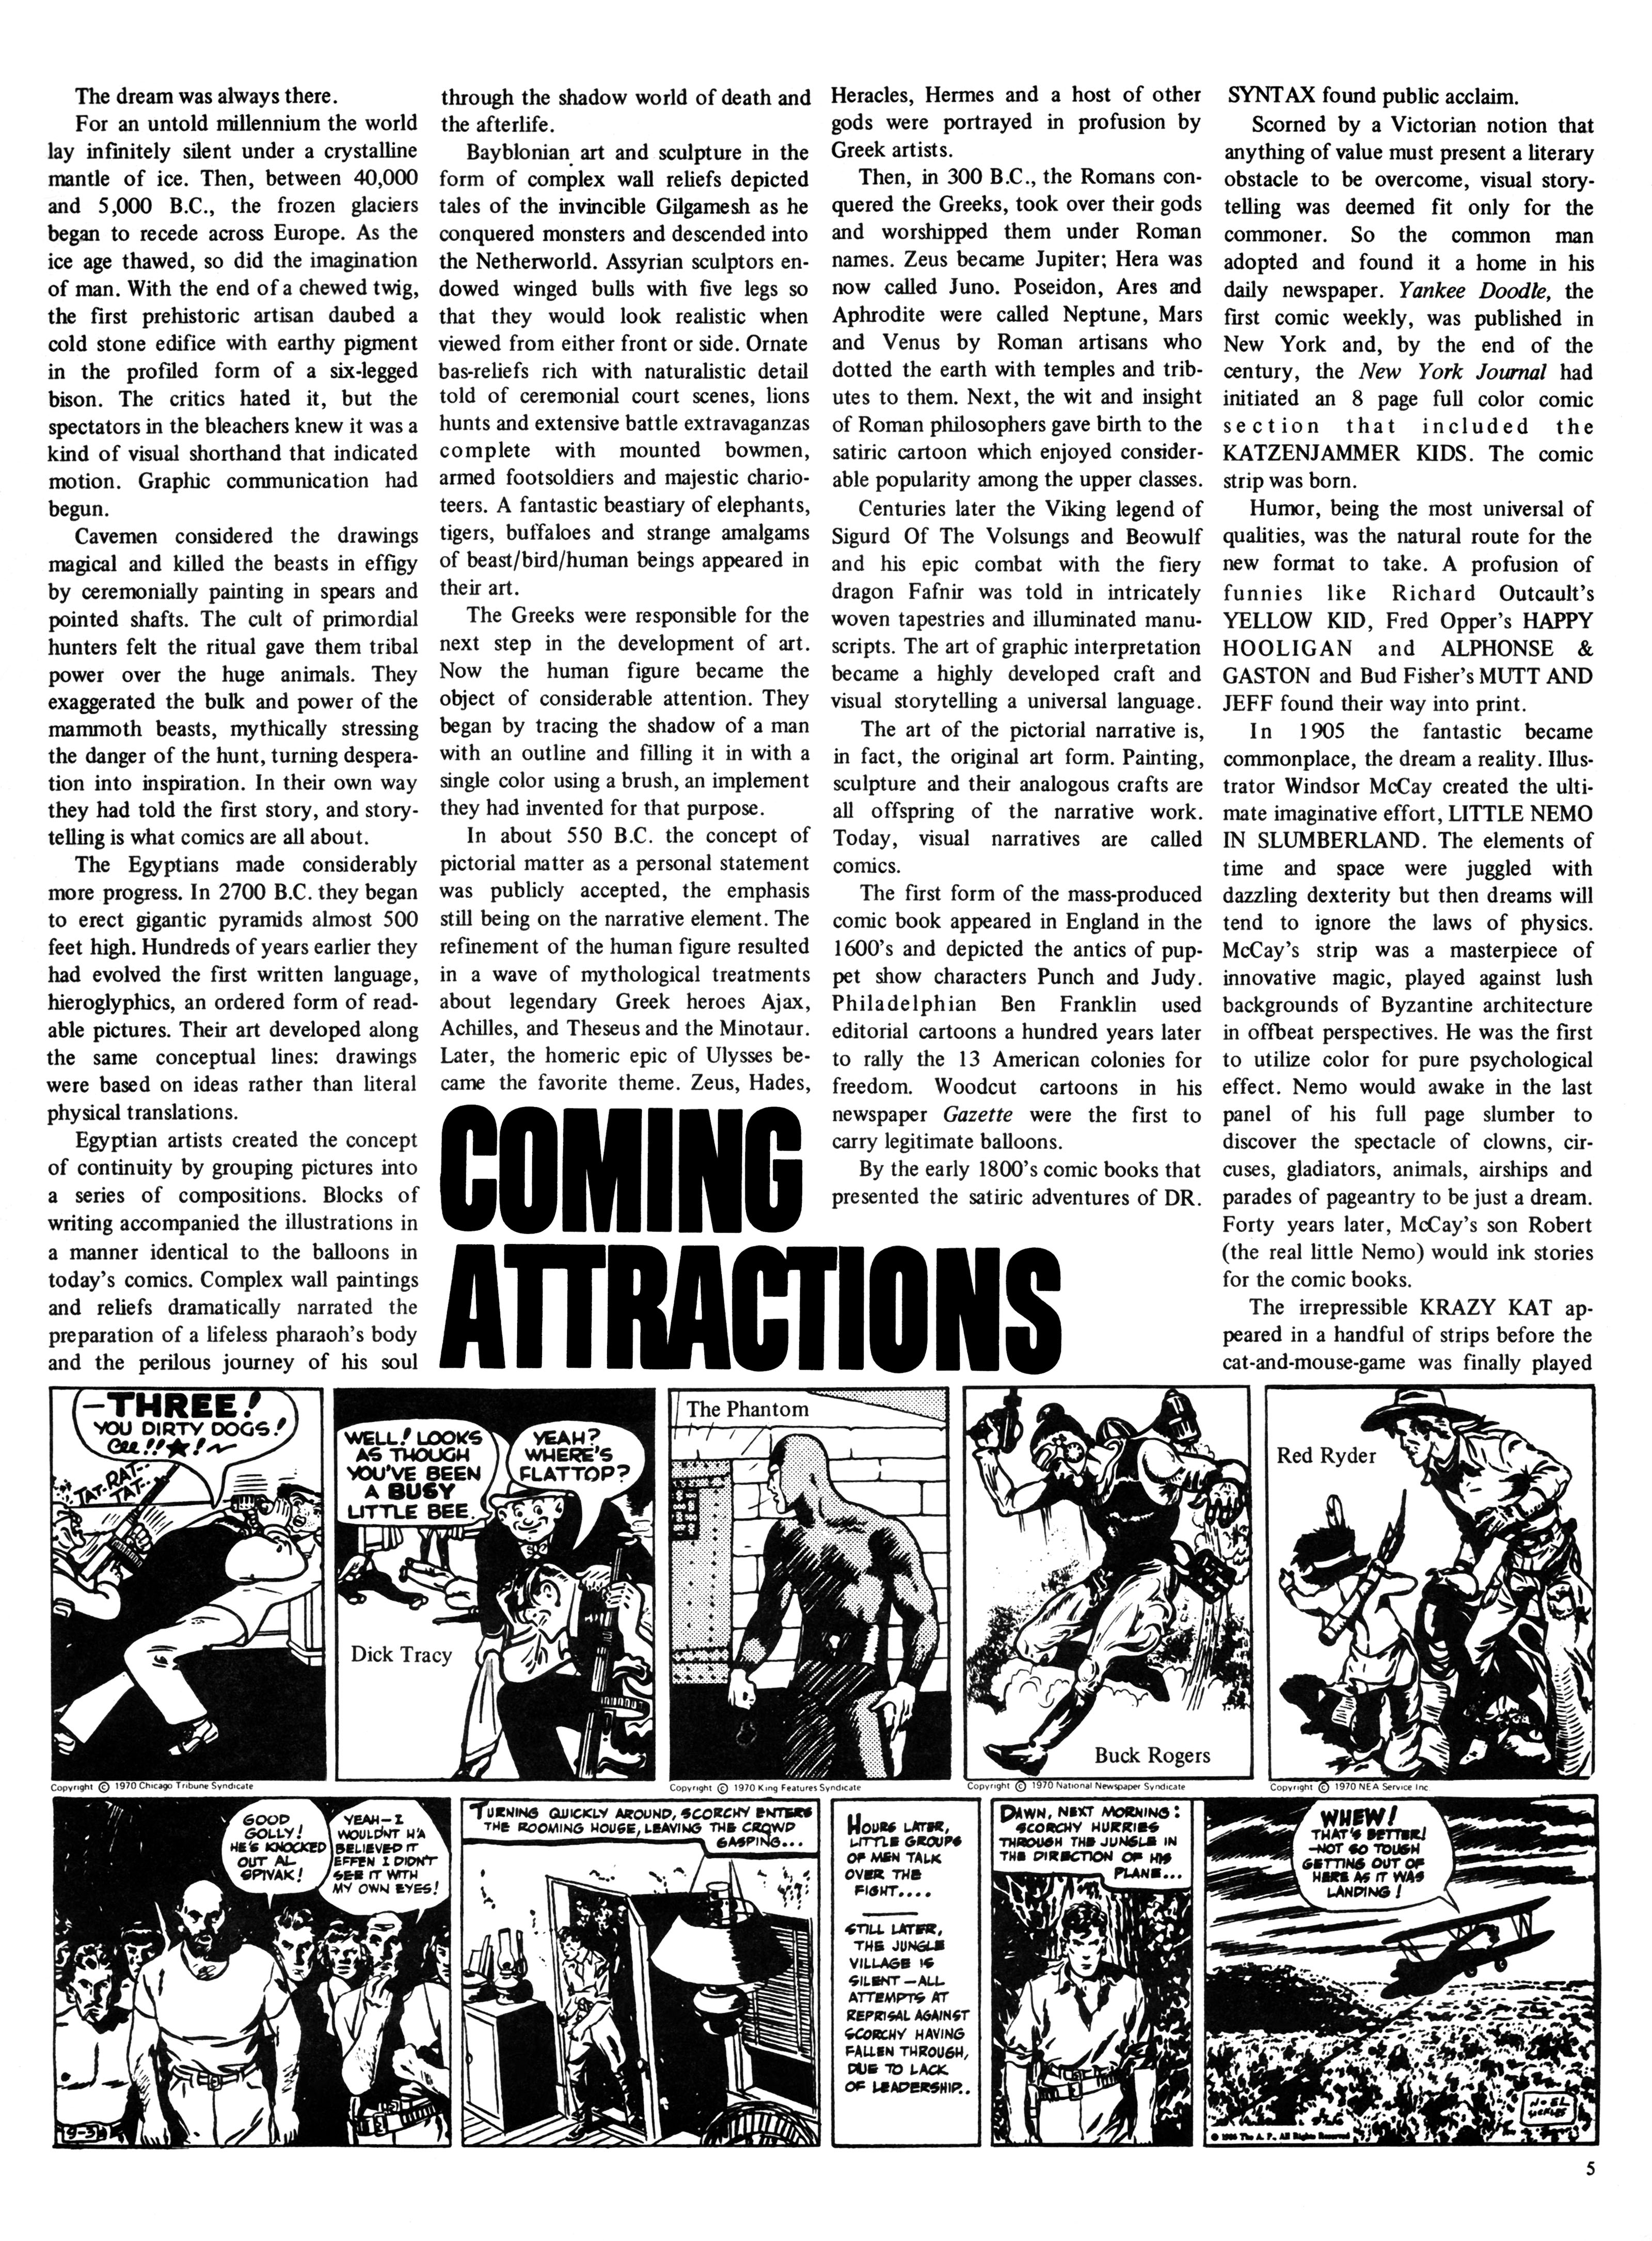 Read online The Steranko History of Comics comic -  Issue # TPB 1 - 6